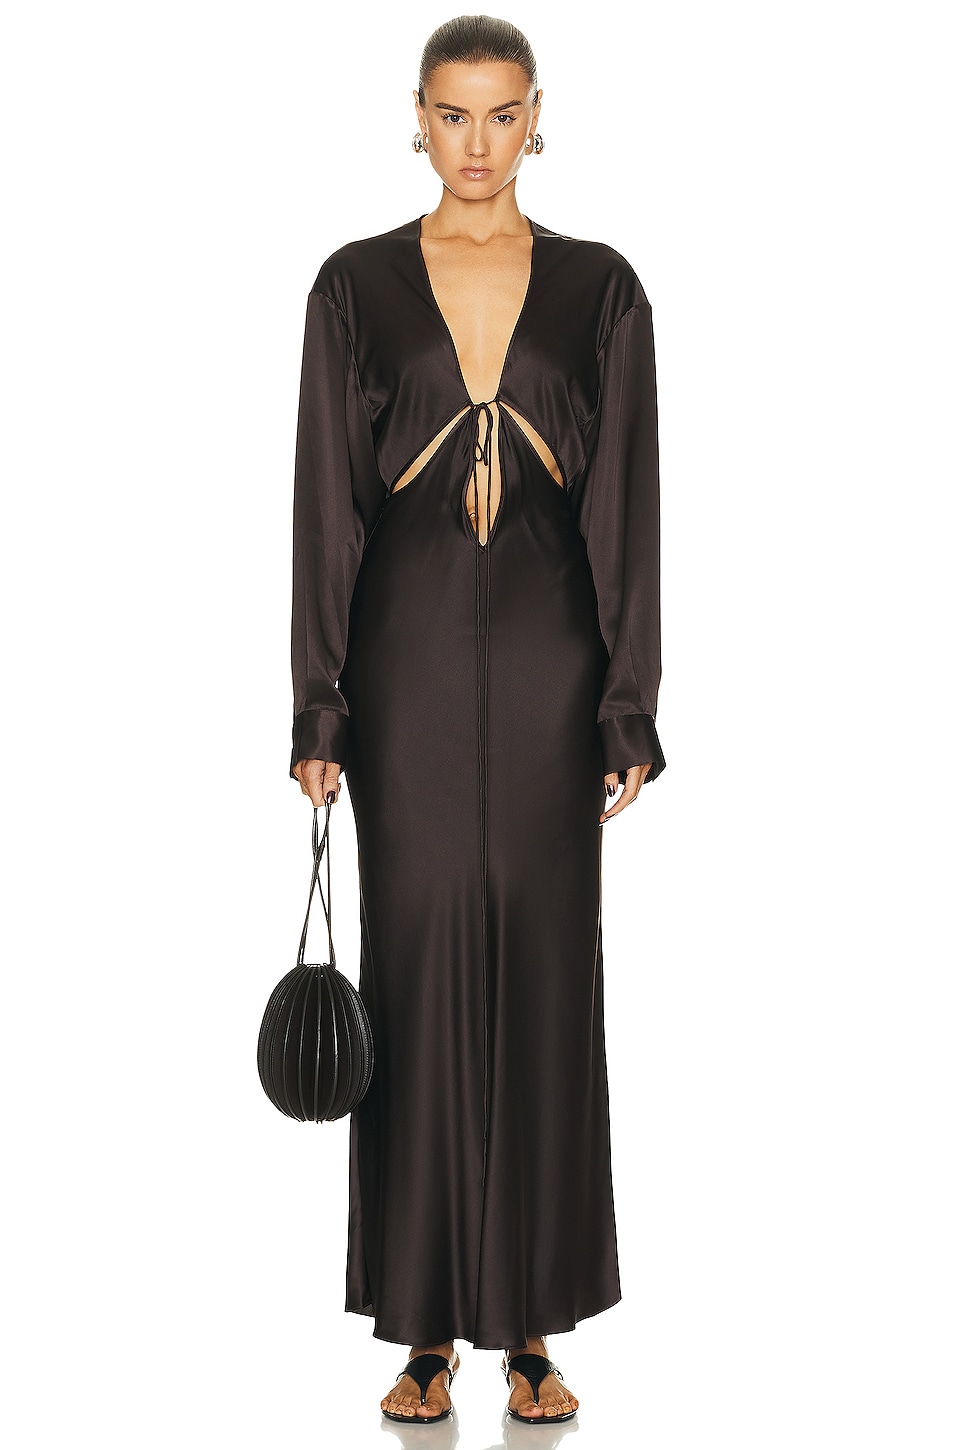 Christopher Esber Triquetra Front Tie Shirt Dress in Cocoa | FWRD